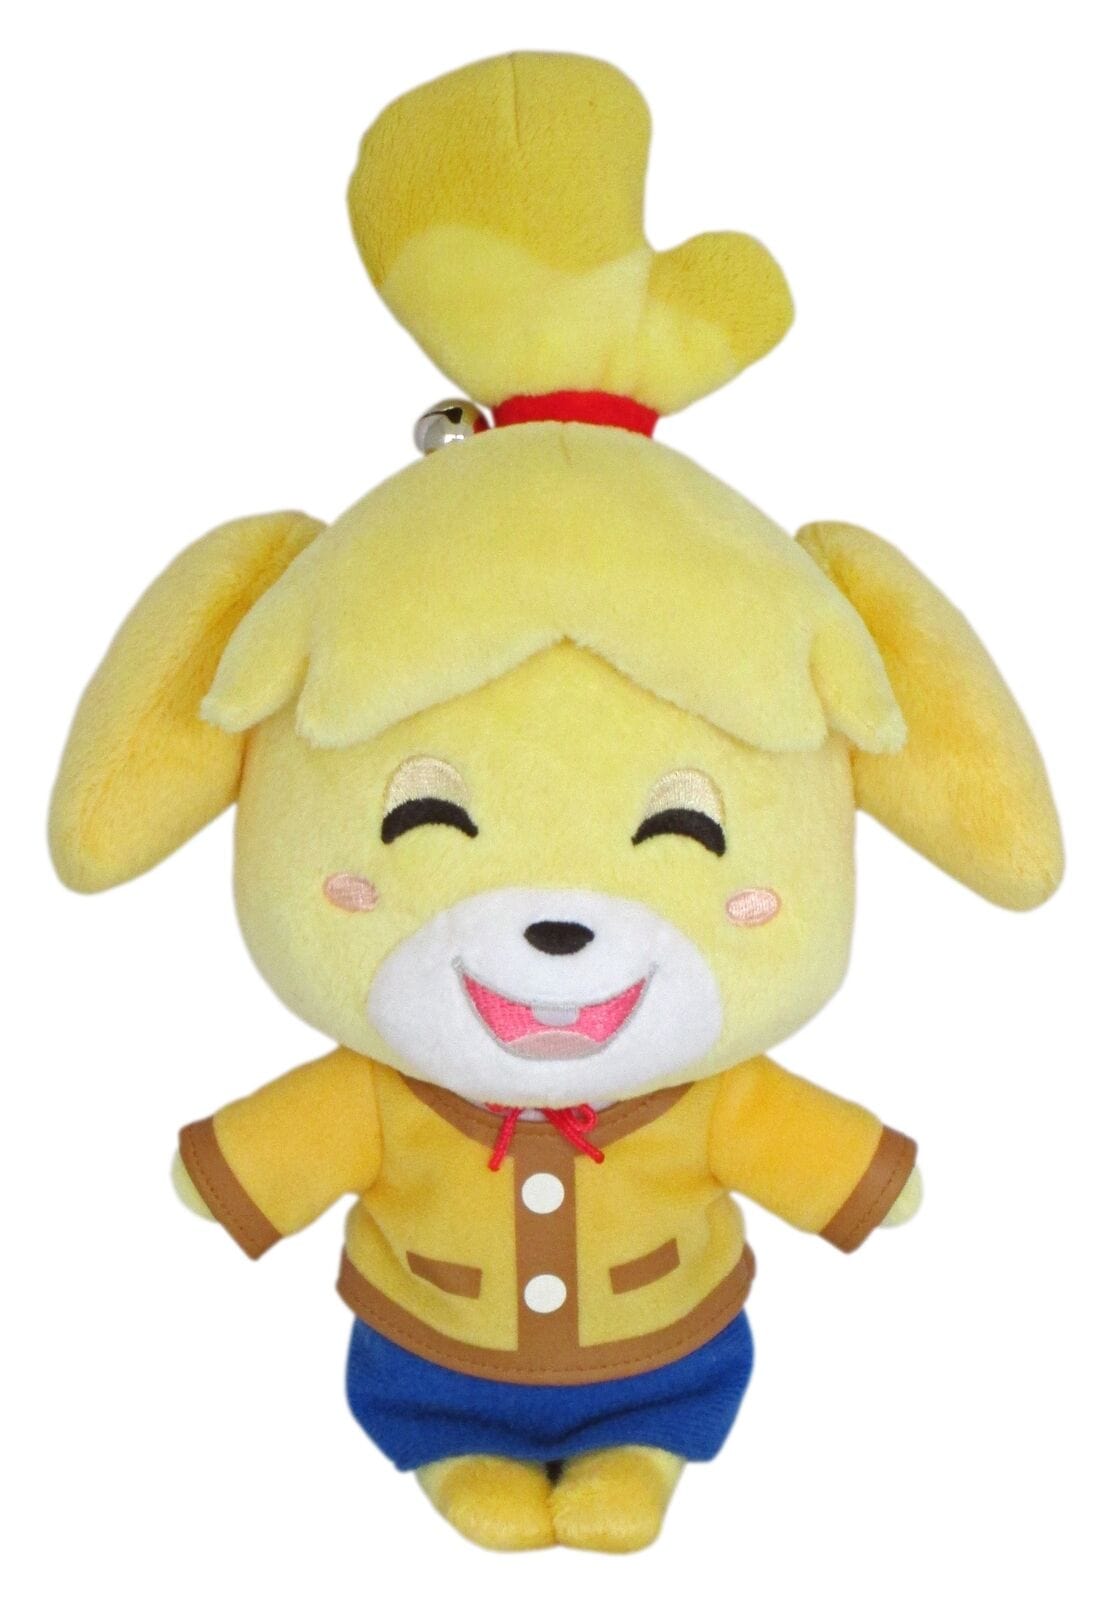 Little Buddy: Animal Crossing - Isabelle, Smiling 6"